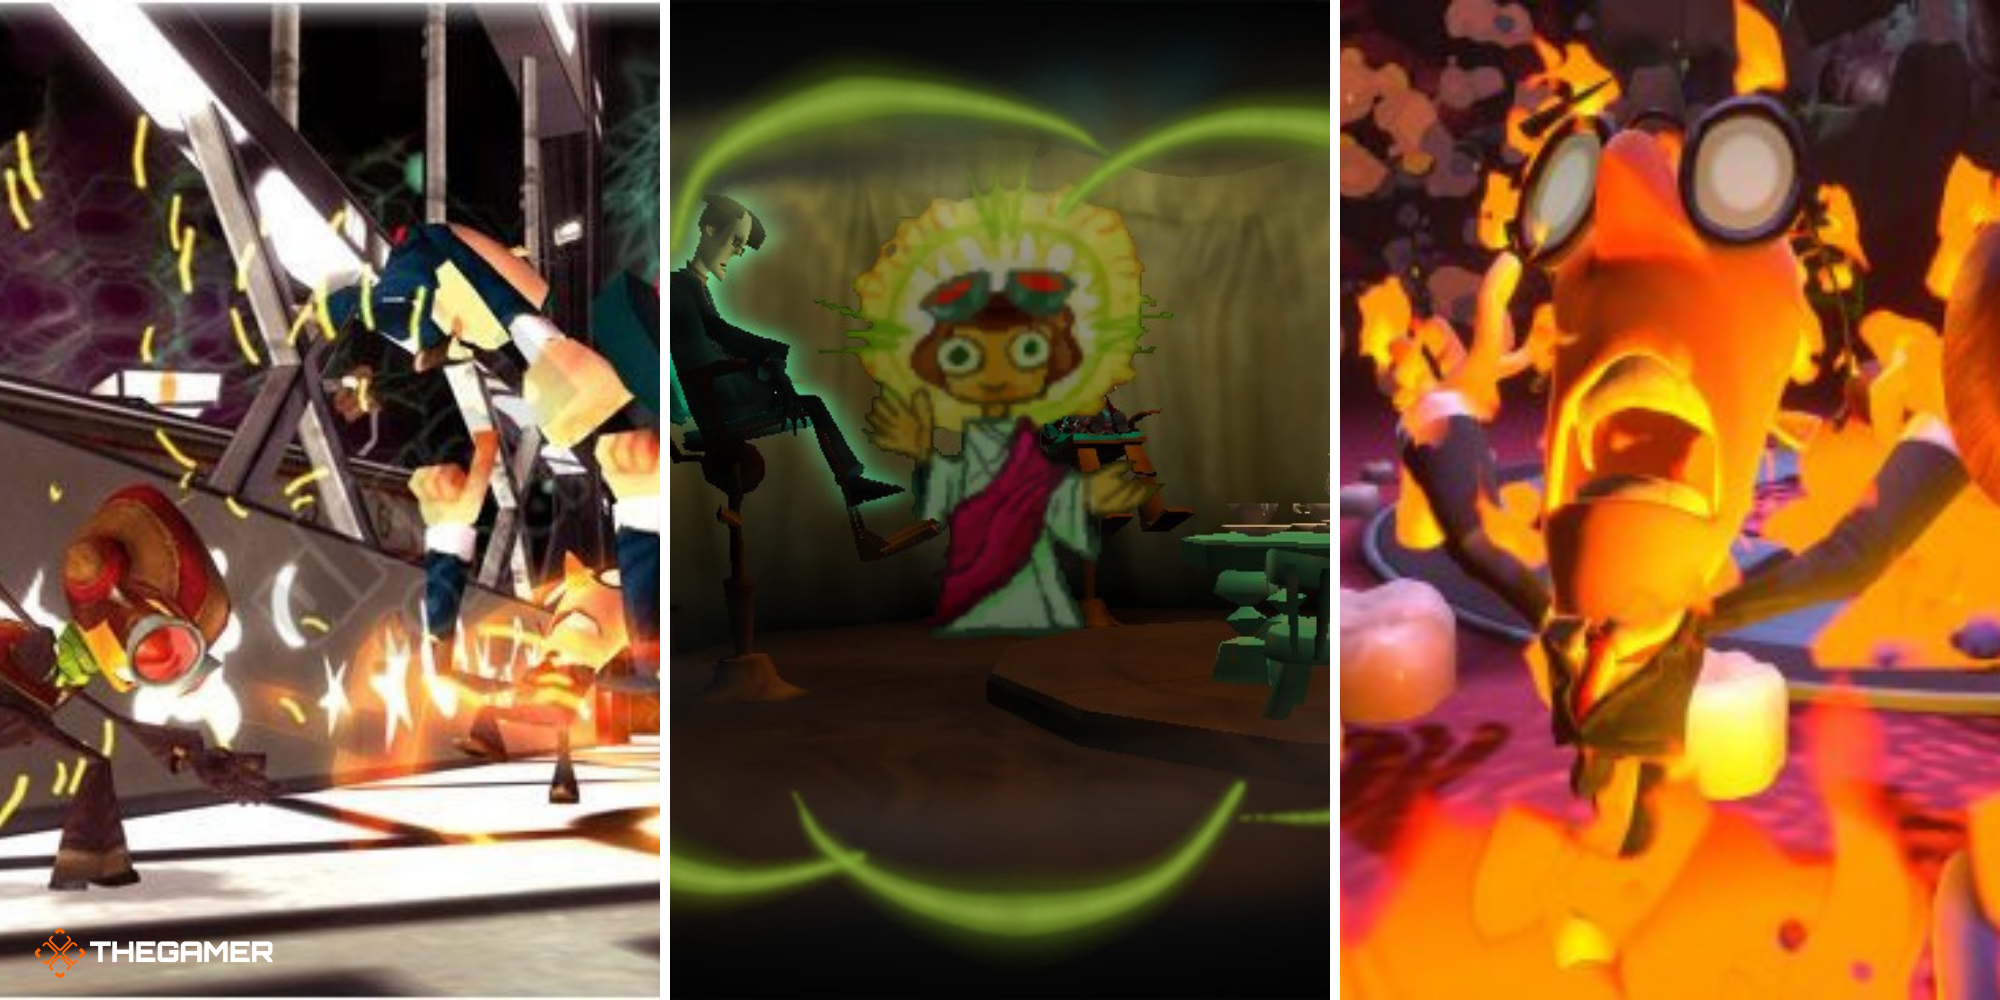 Psychonauts split image - Raz using his psychic abilities (Marksmanship on left, Clairvoyance in centre, Pyrokinesis on right)